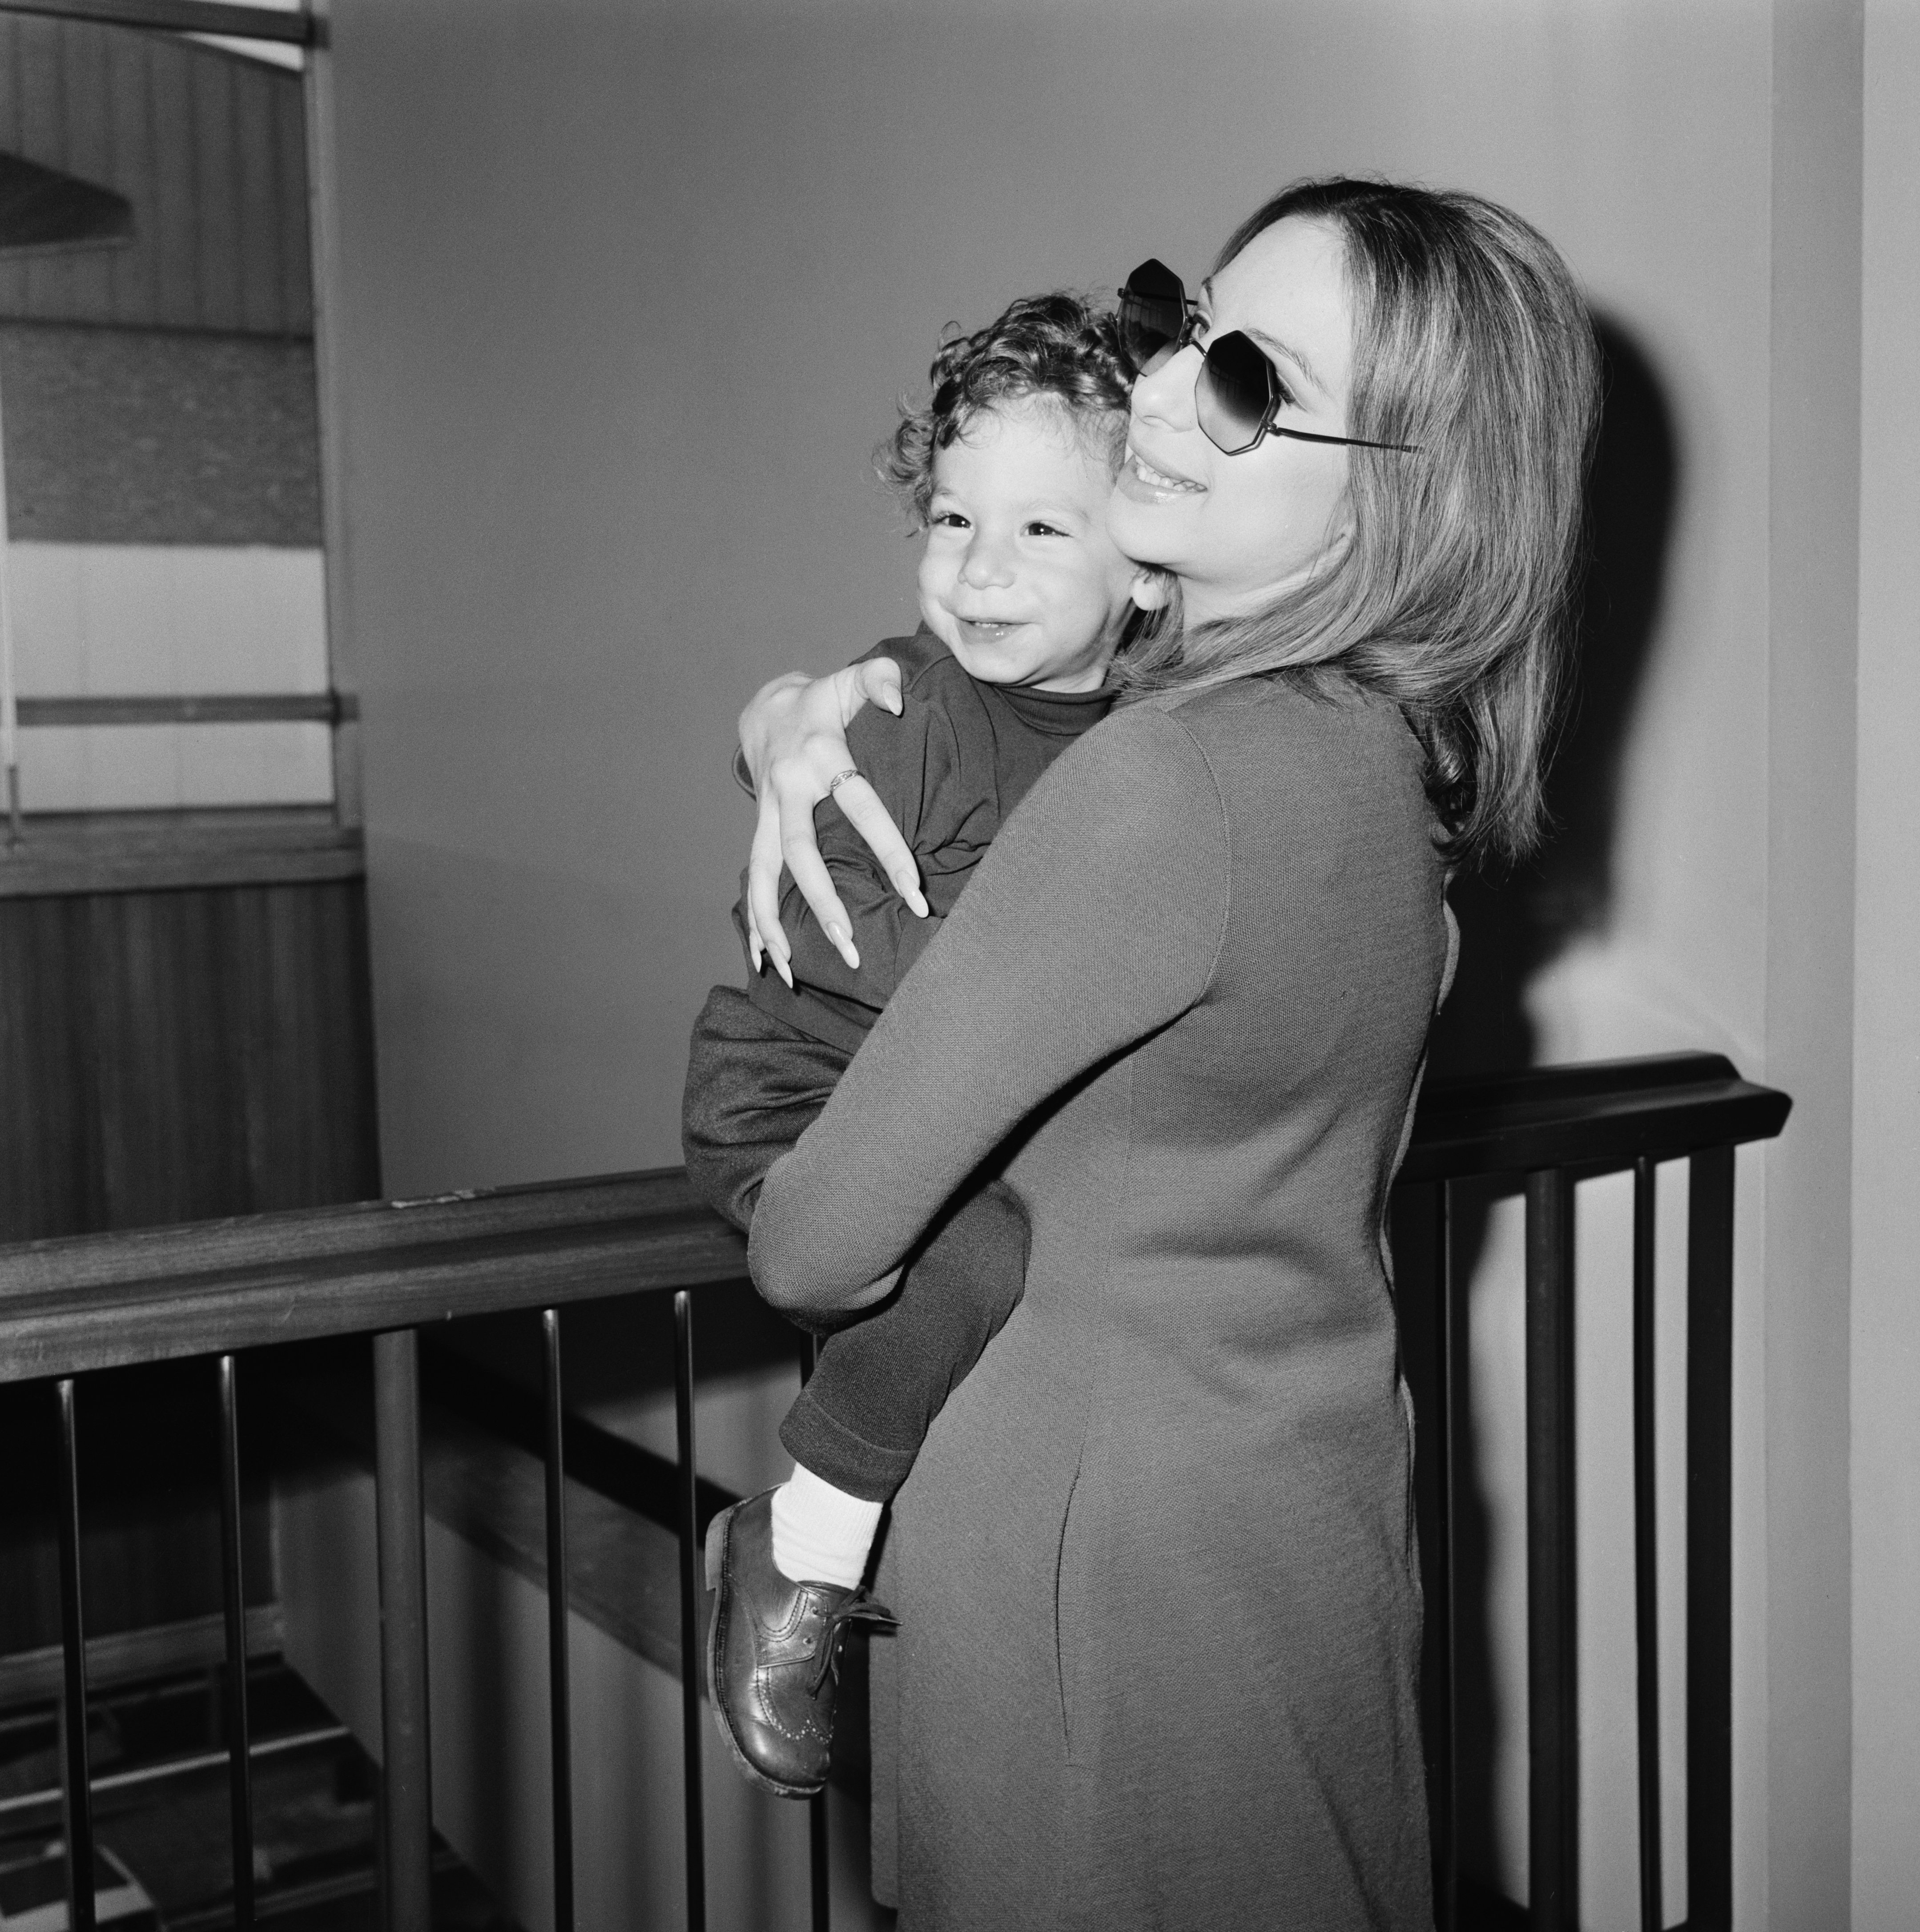 Barbra Streisand with her son Jason Gould at Heathrow Airport UK on April 11, 1969 | Source: Getty Images